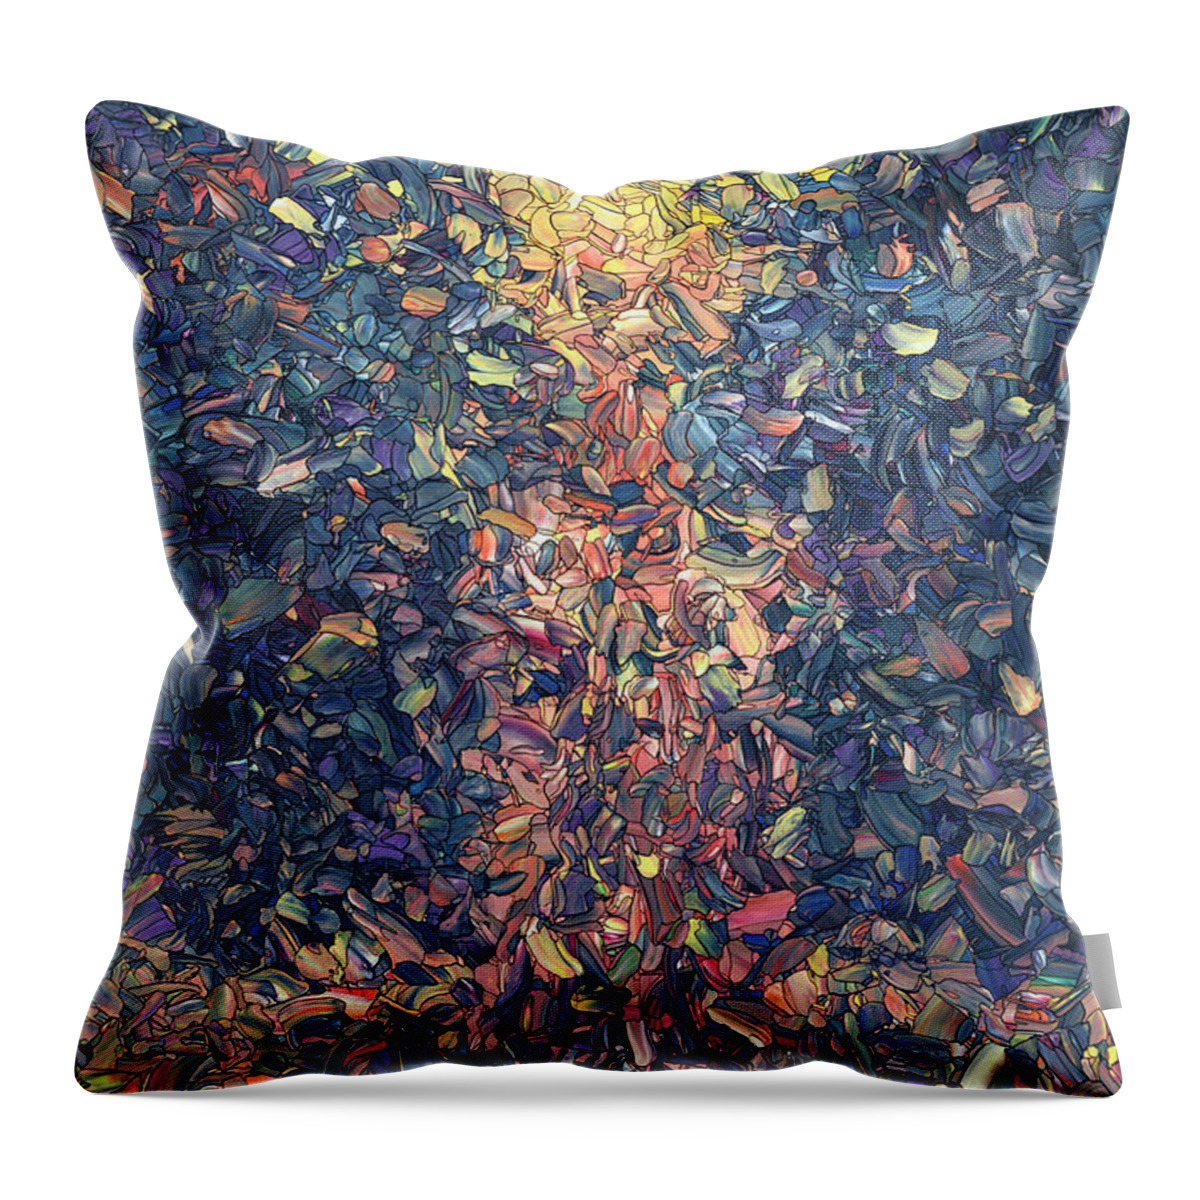 Candle Throw Pillow featuring the painting Fragmented Flame by James W Johnson